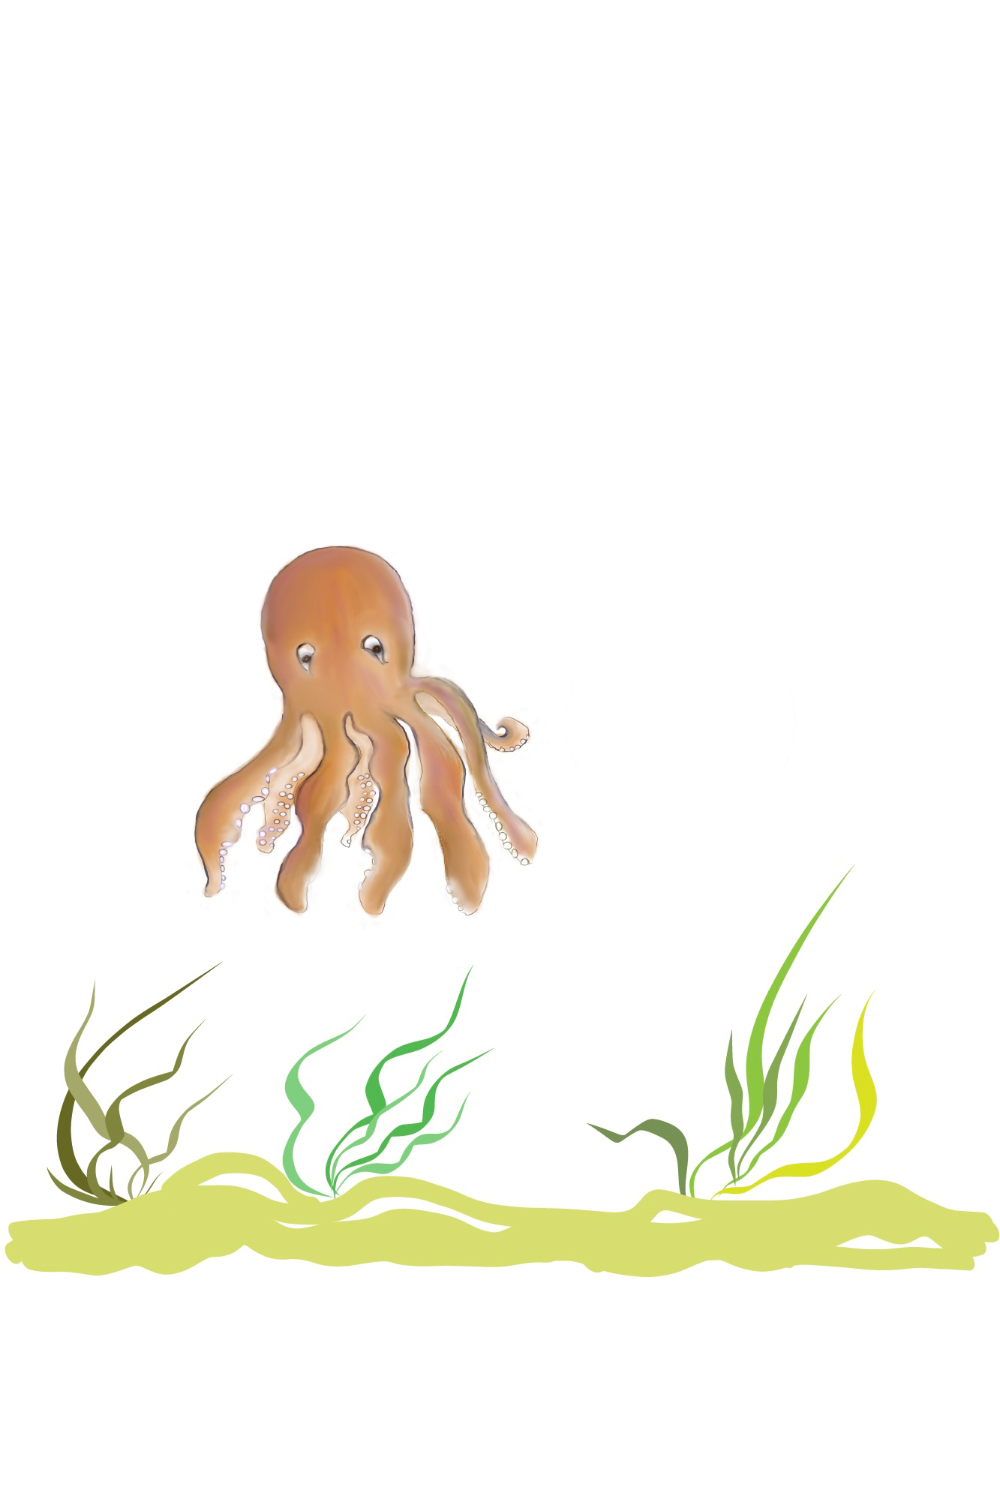 Octopus pinterest preview image.